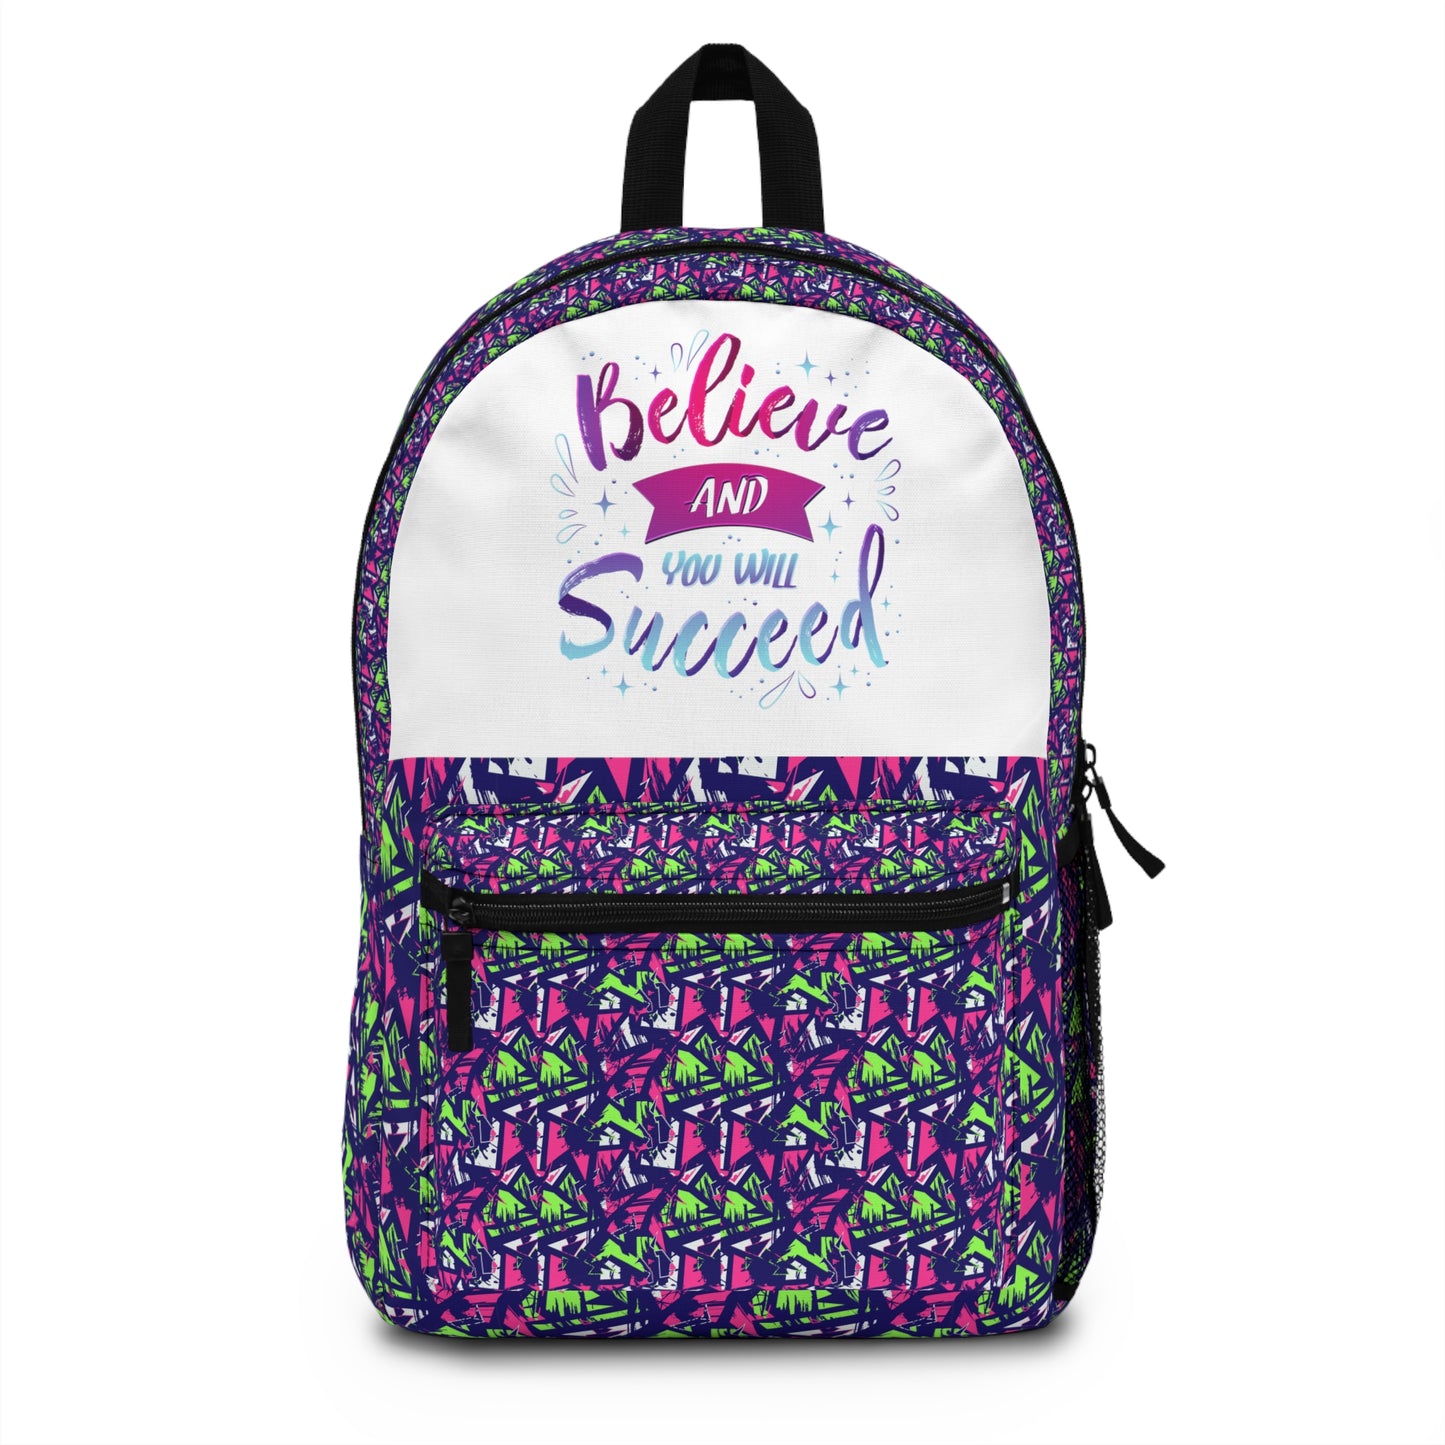 Niccie's Unlock Success with Belief  Backpack